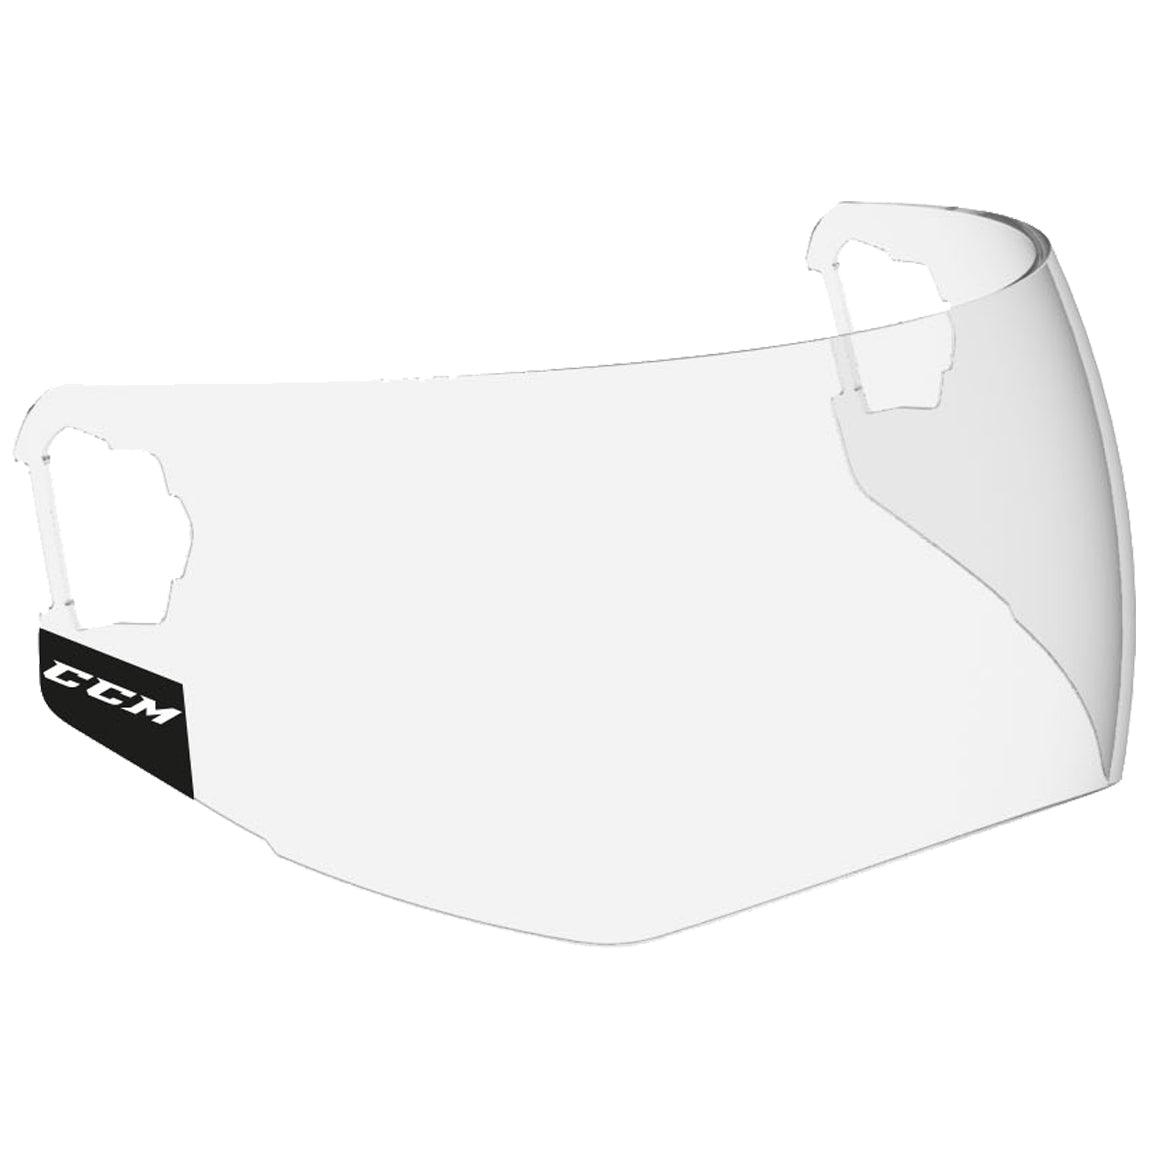 Visor Laser Curve With Fast - Clip - Senior - Sports Excellence